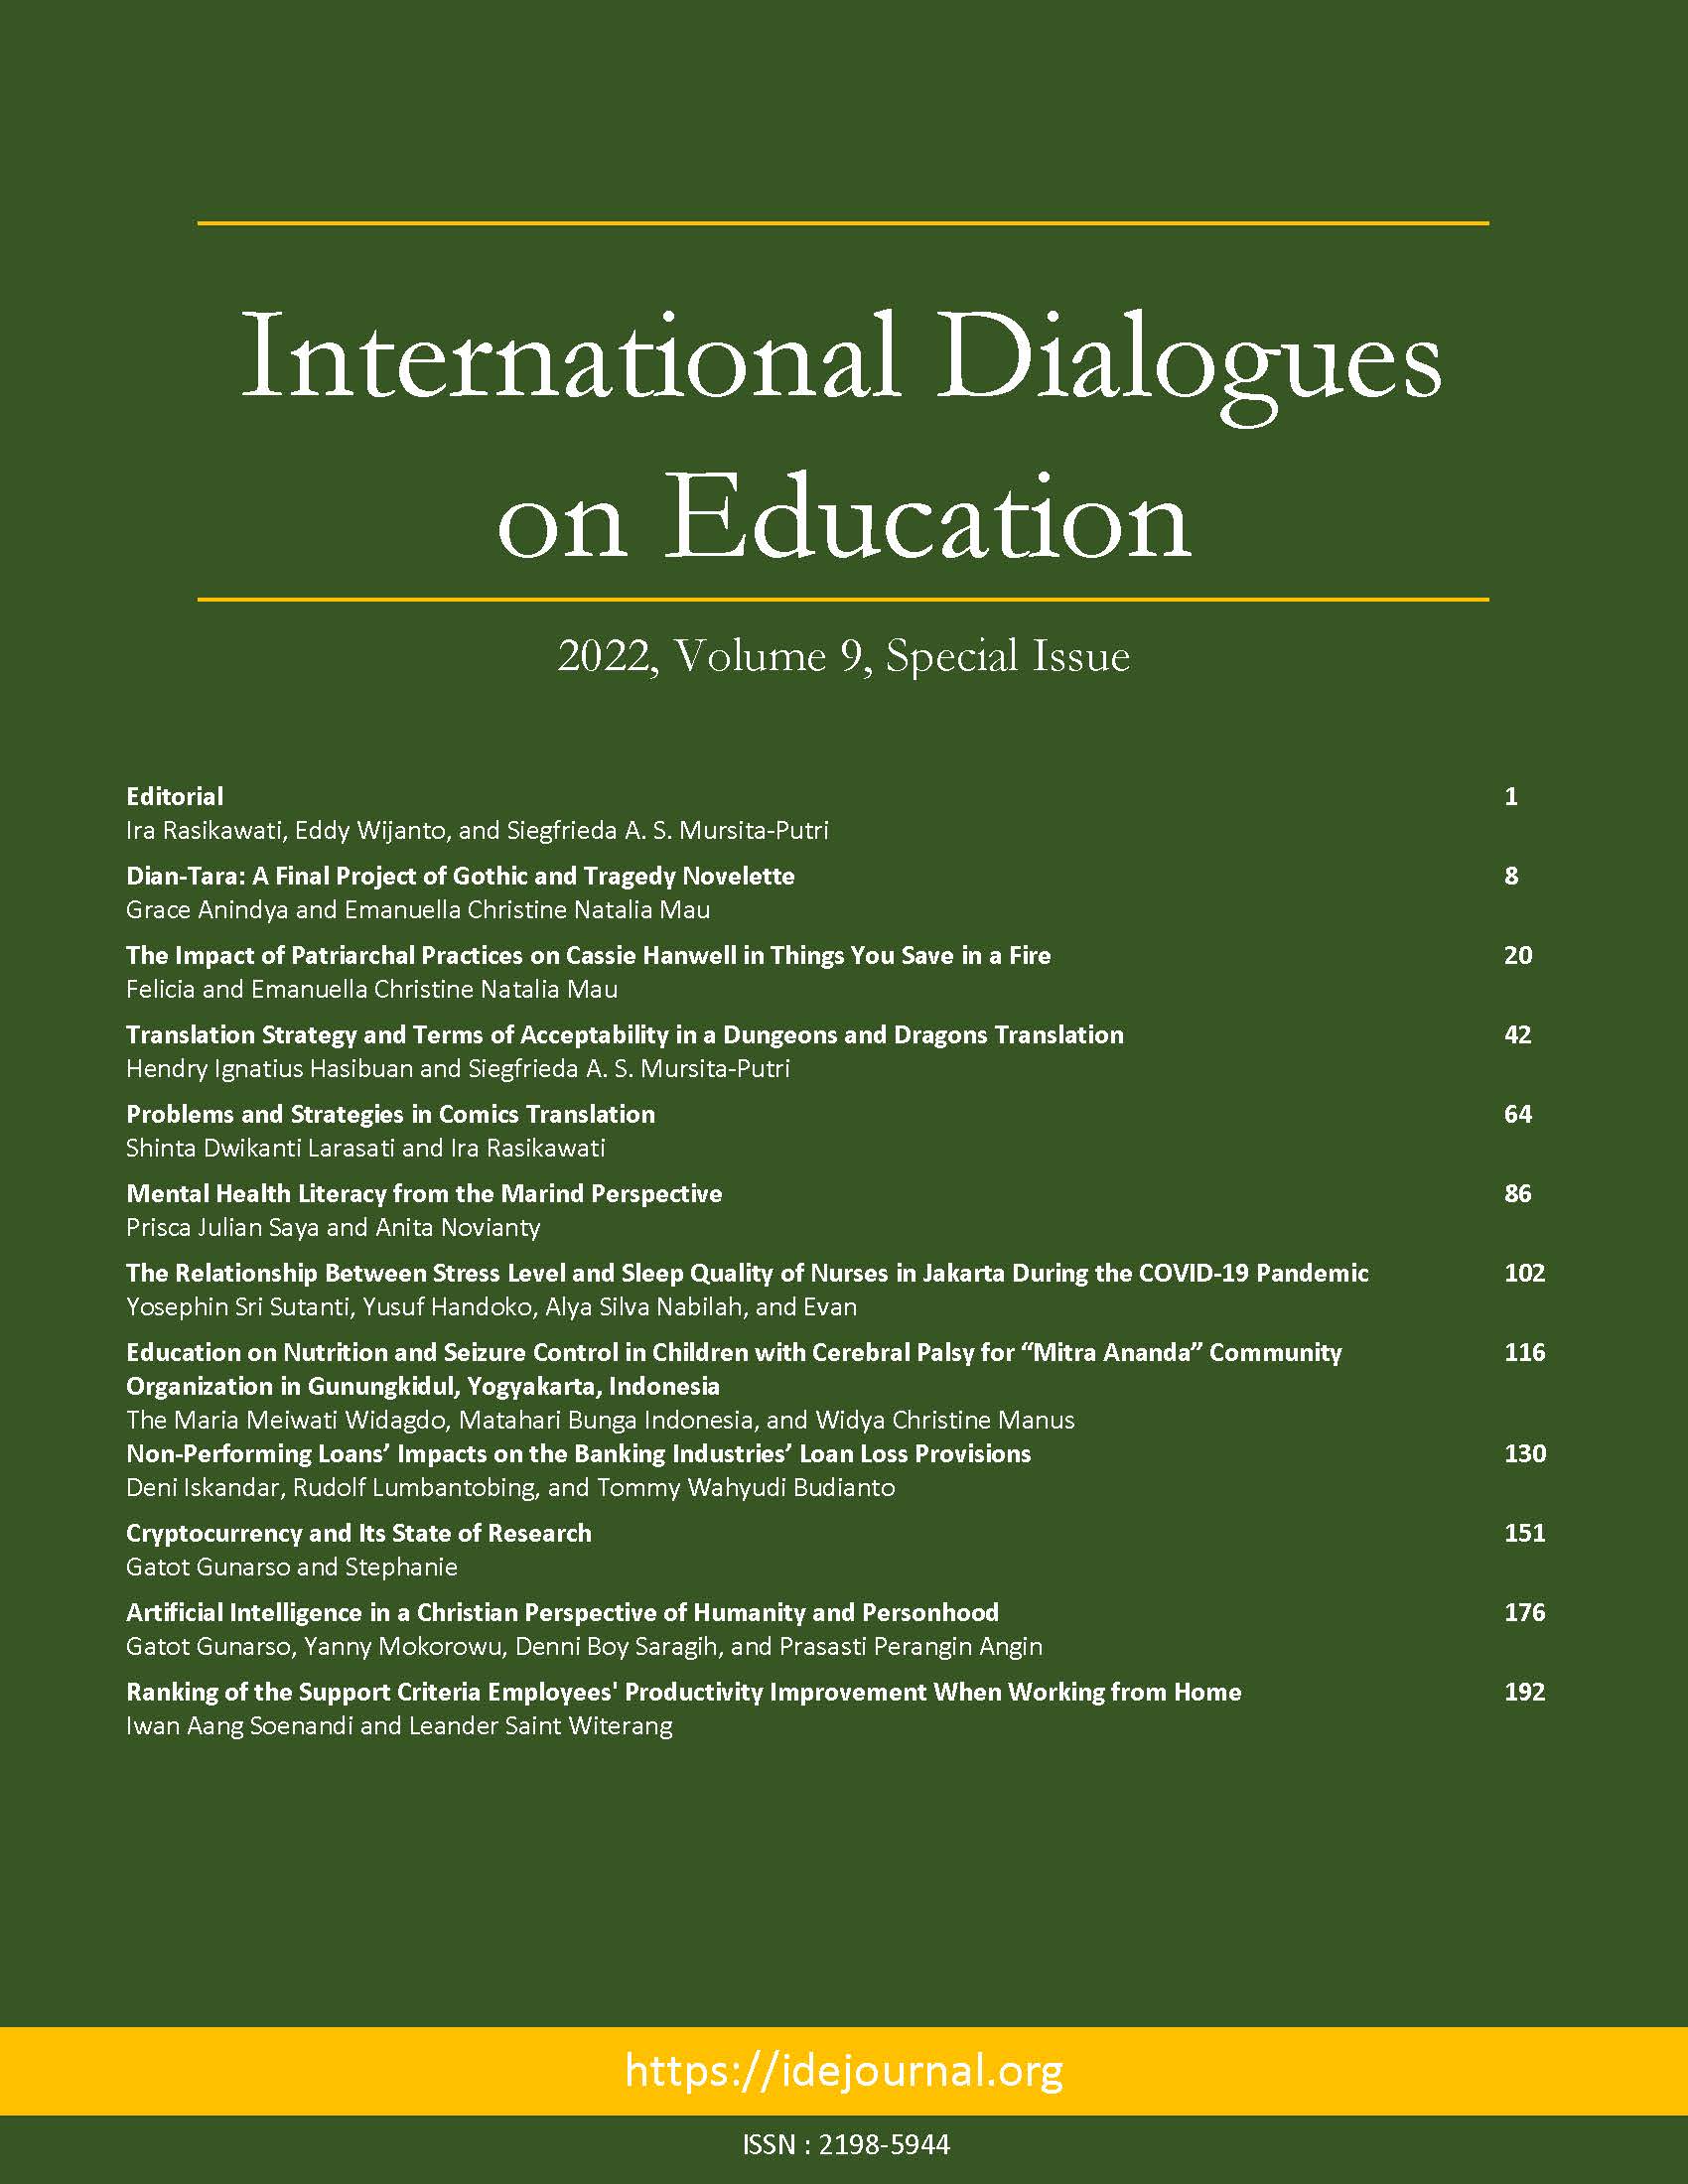 IDE Journal 2022 Volume 9 Issue 1 Special Issue Cover and Table of Contents